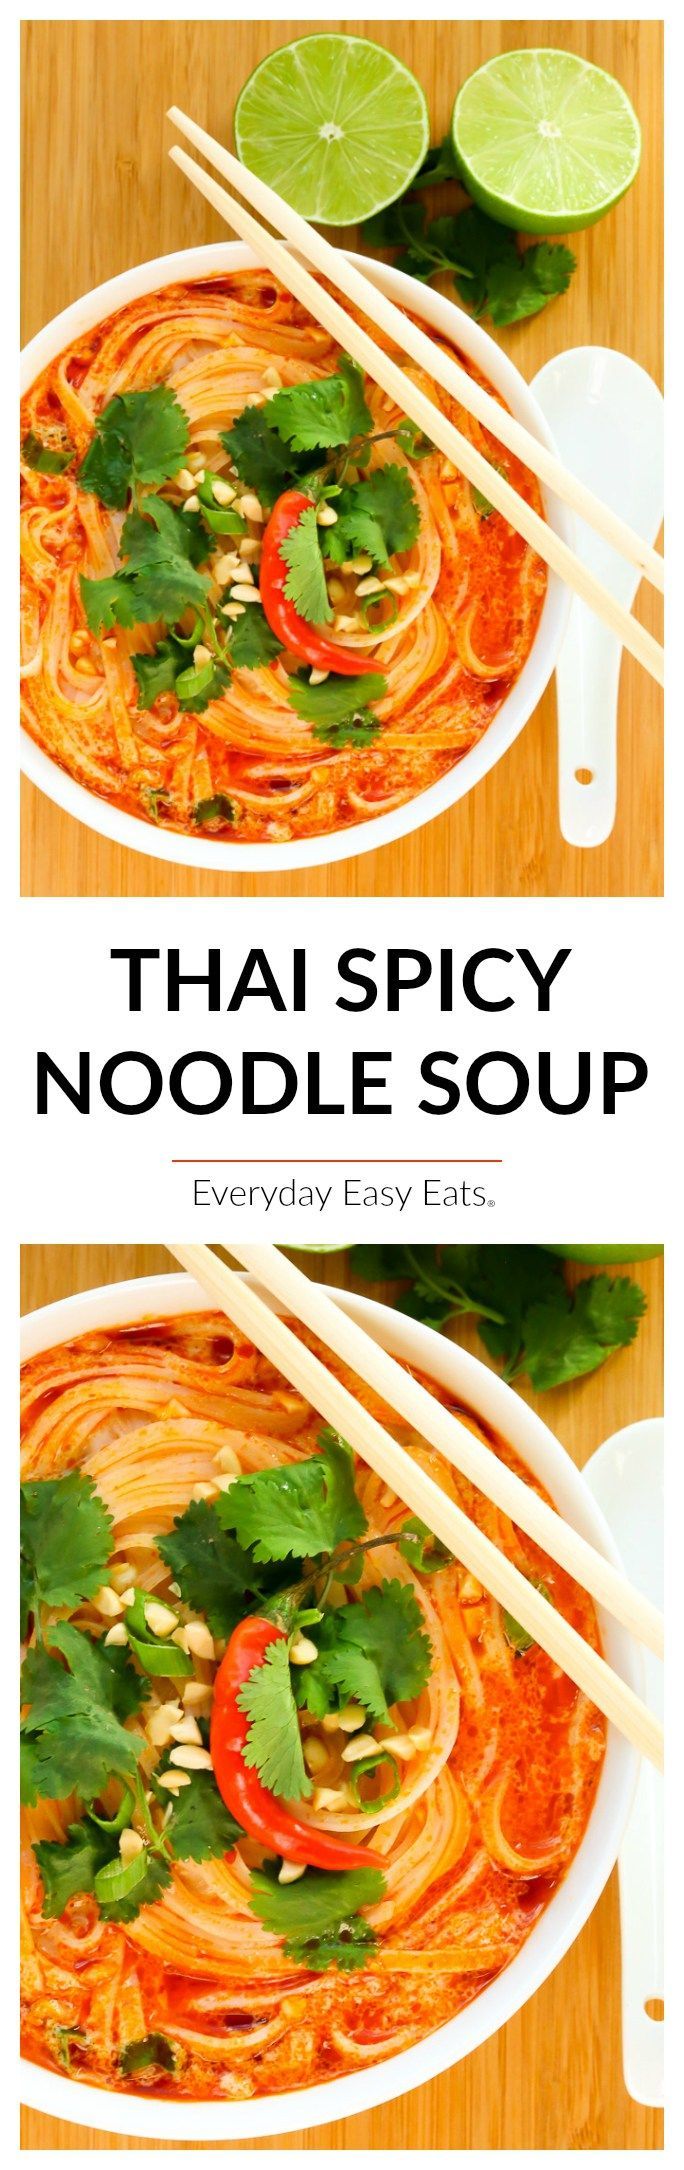 This easy Thai Spicy Noodle Soup recipe is quick, hearty and infused with fragrant Thai flavors. A soul-warming soup that’s ready